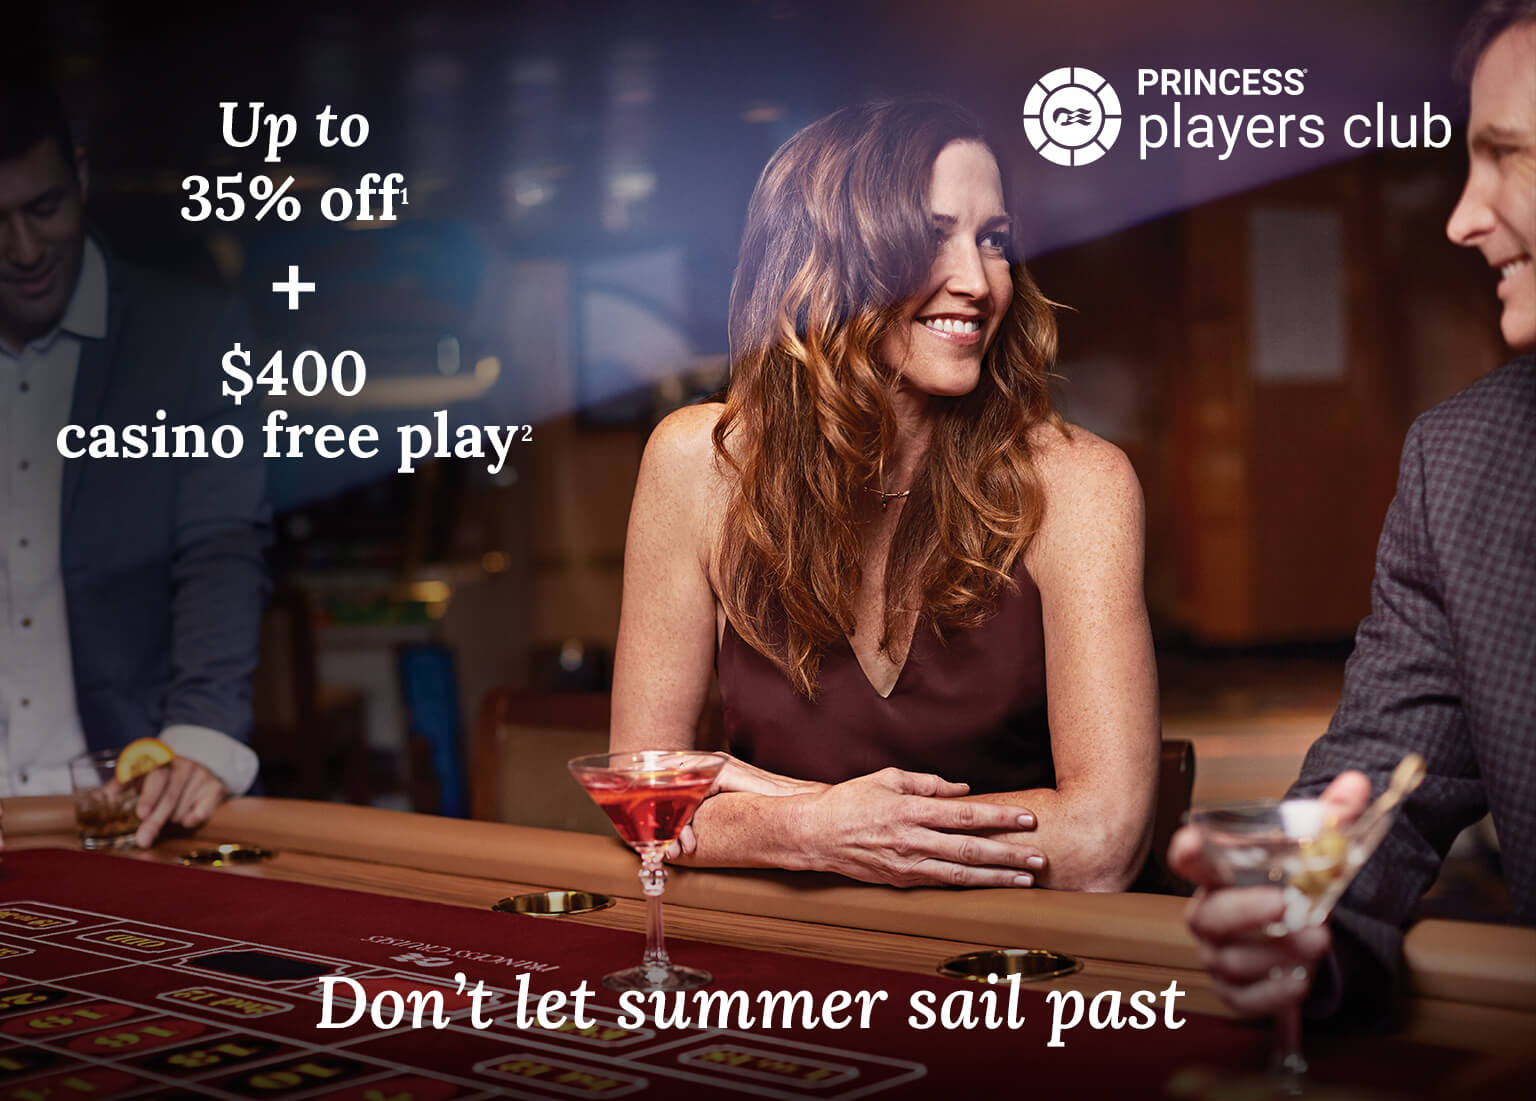 Up to 35% off + $400 casino free play. Click here to book.